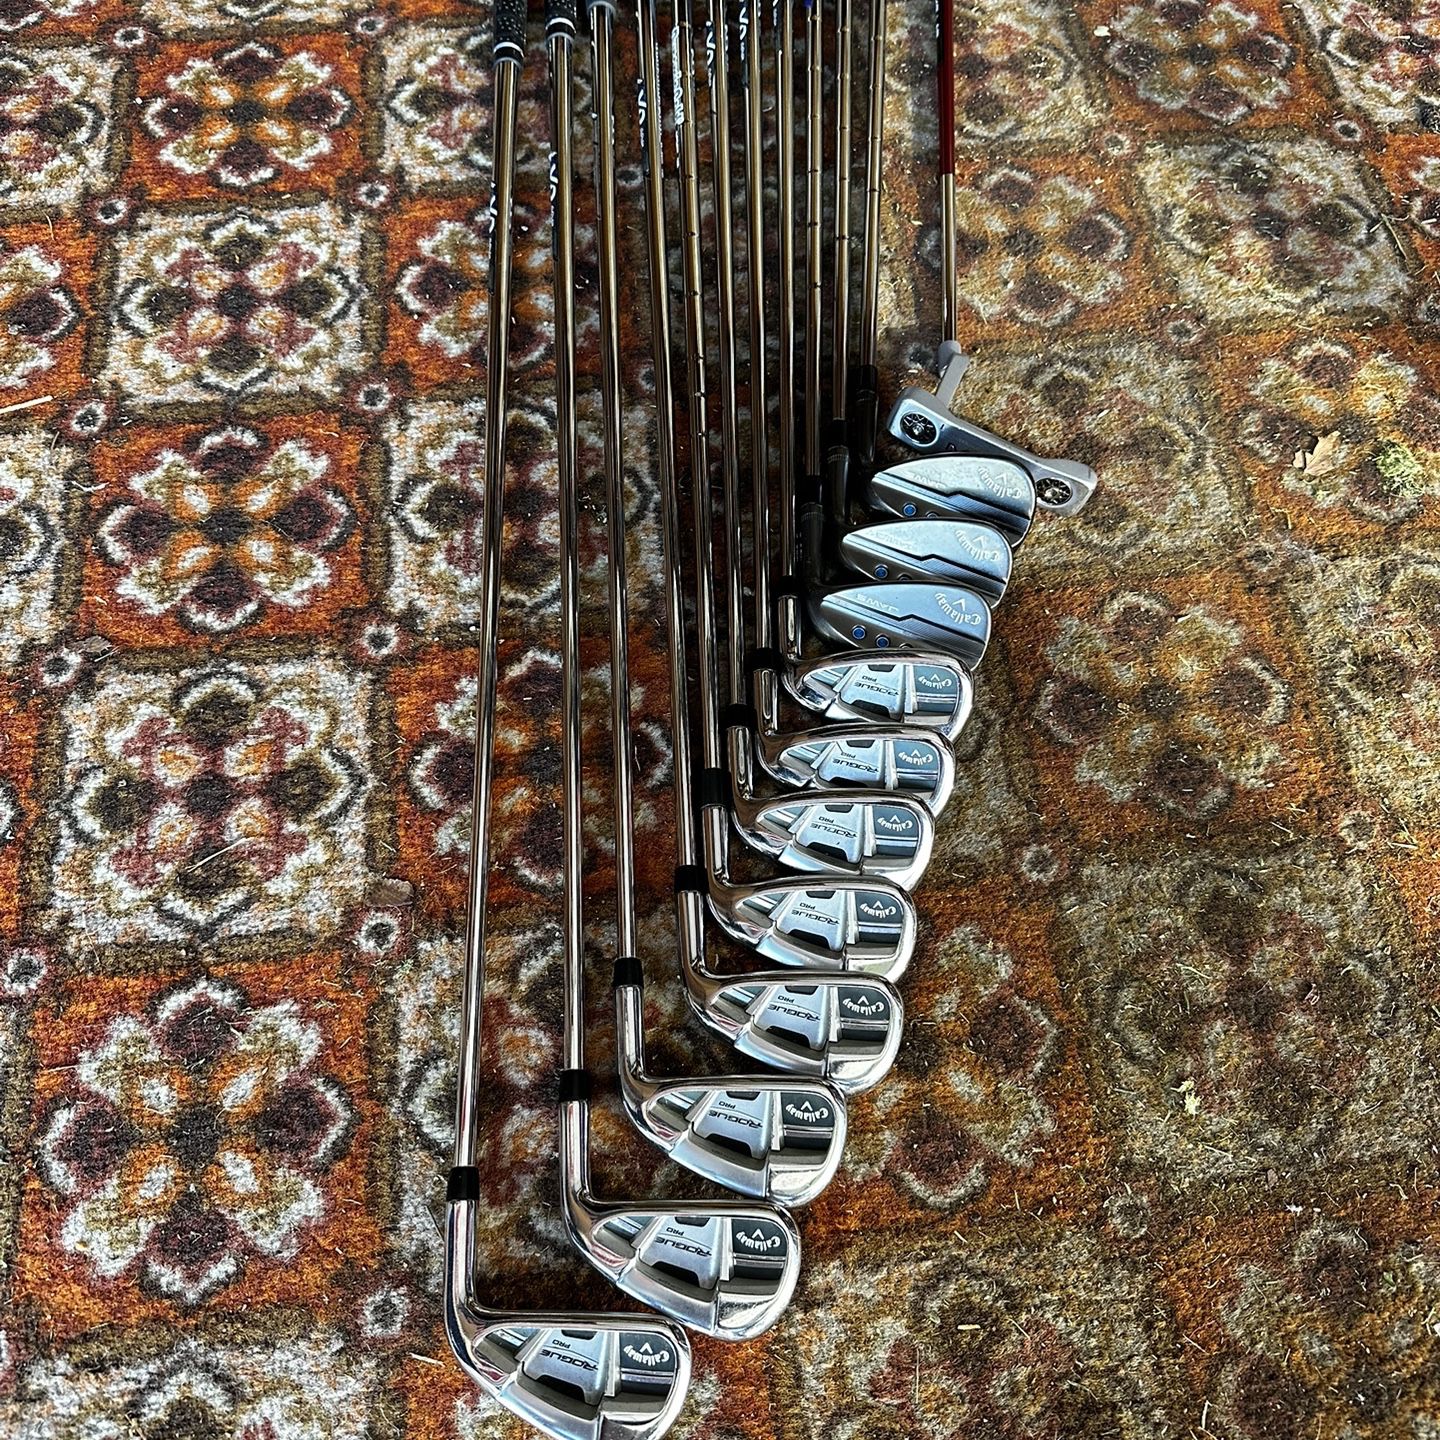 Callaway Rouge Pro Iron set and Odyssey Putter